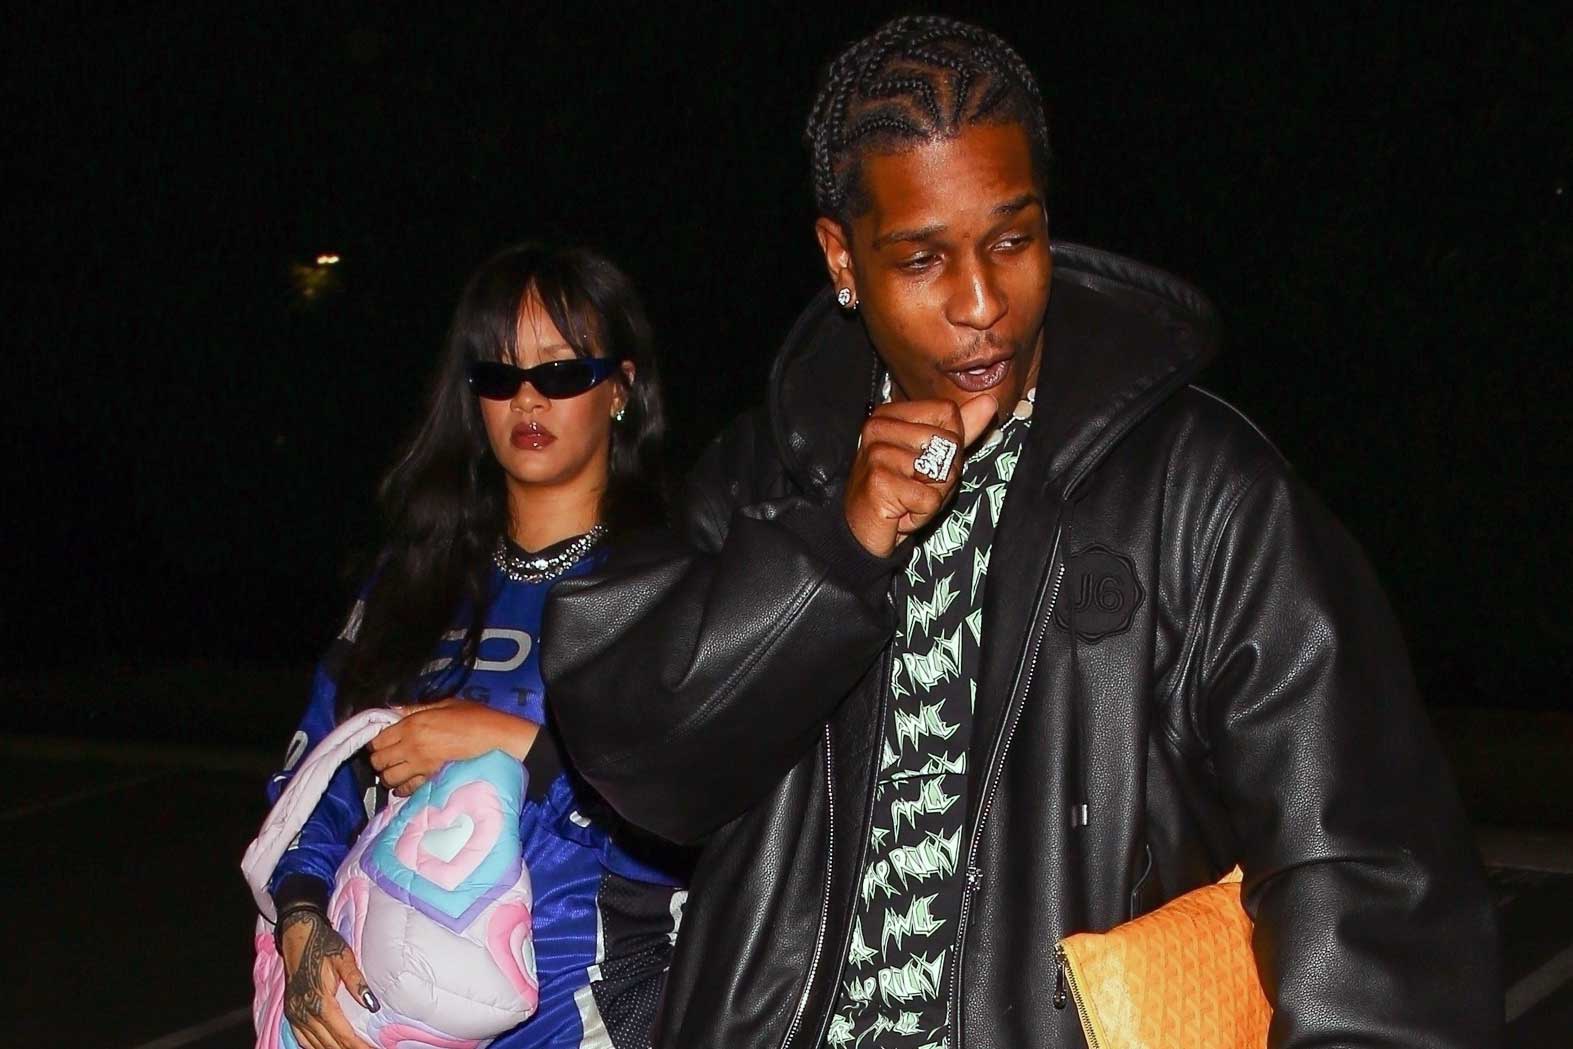 Rihanna & A$AP Rocky Holds Hands After Shopping Together in NYC